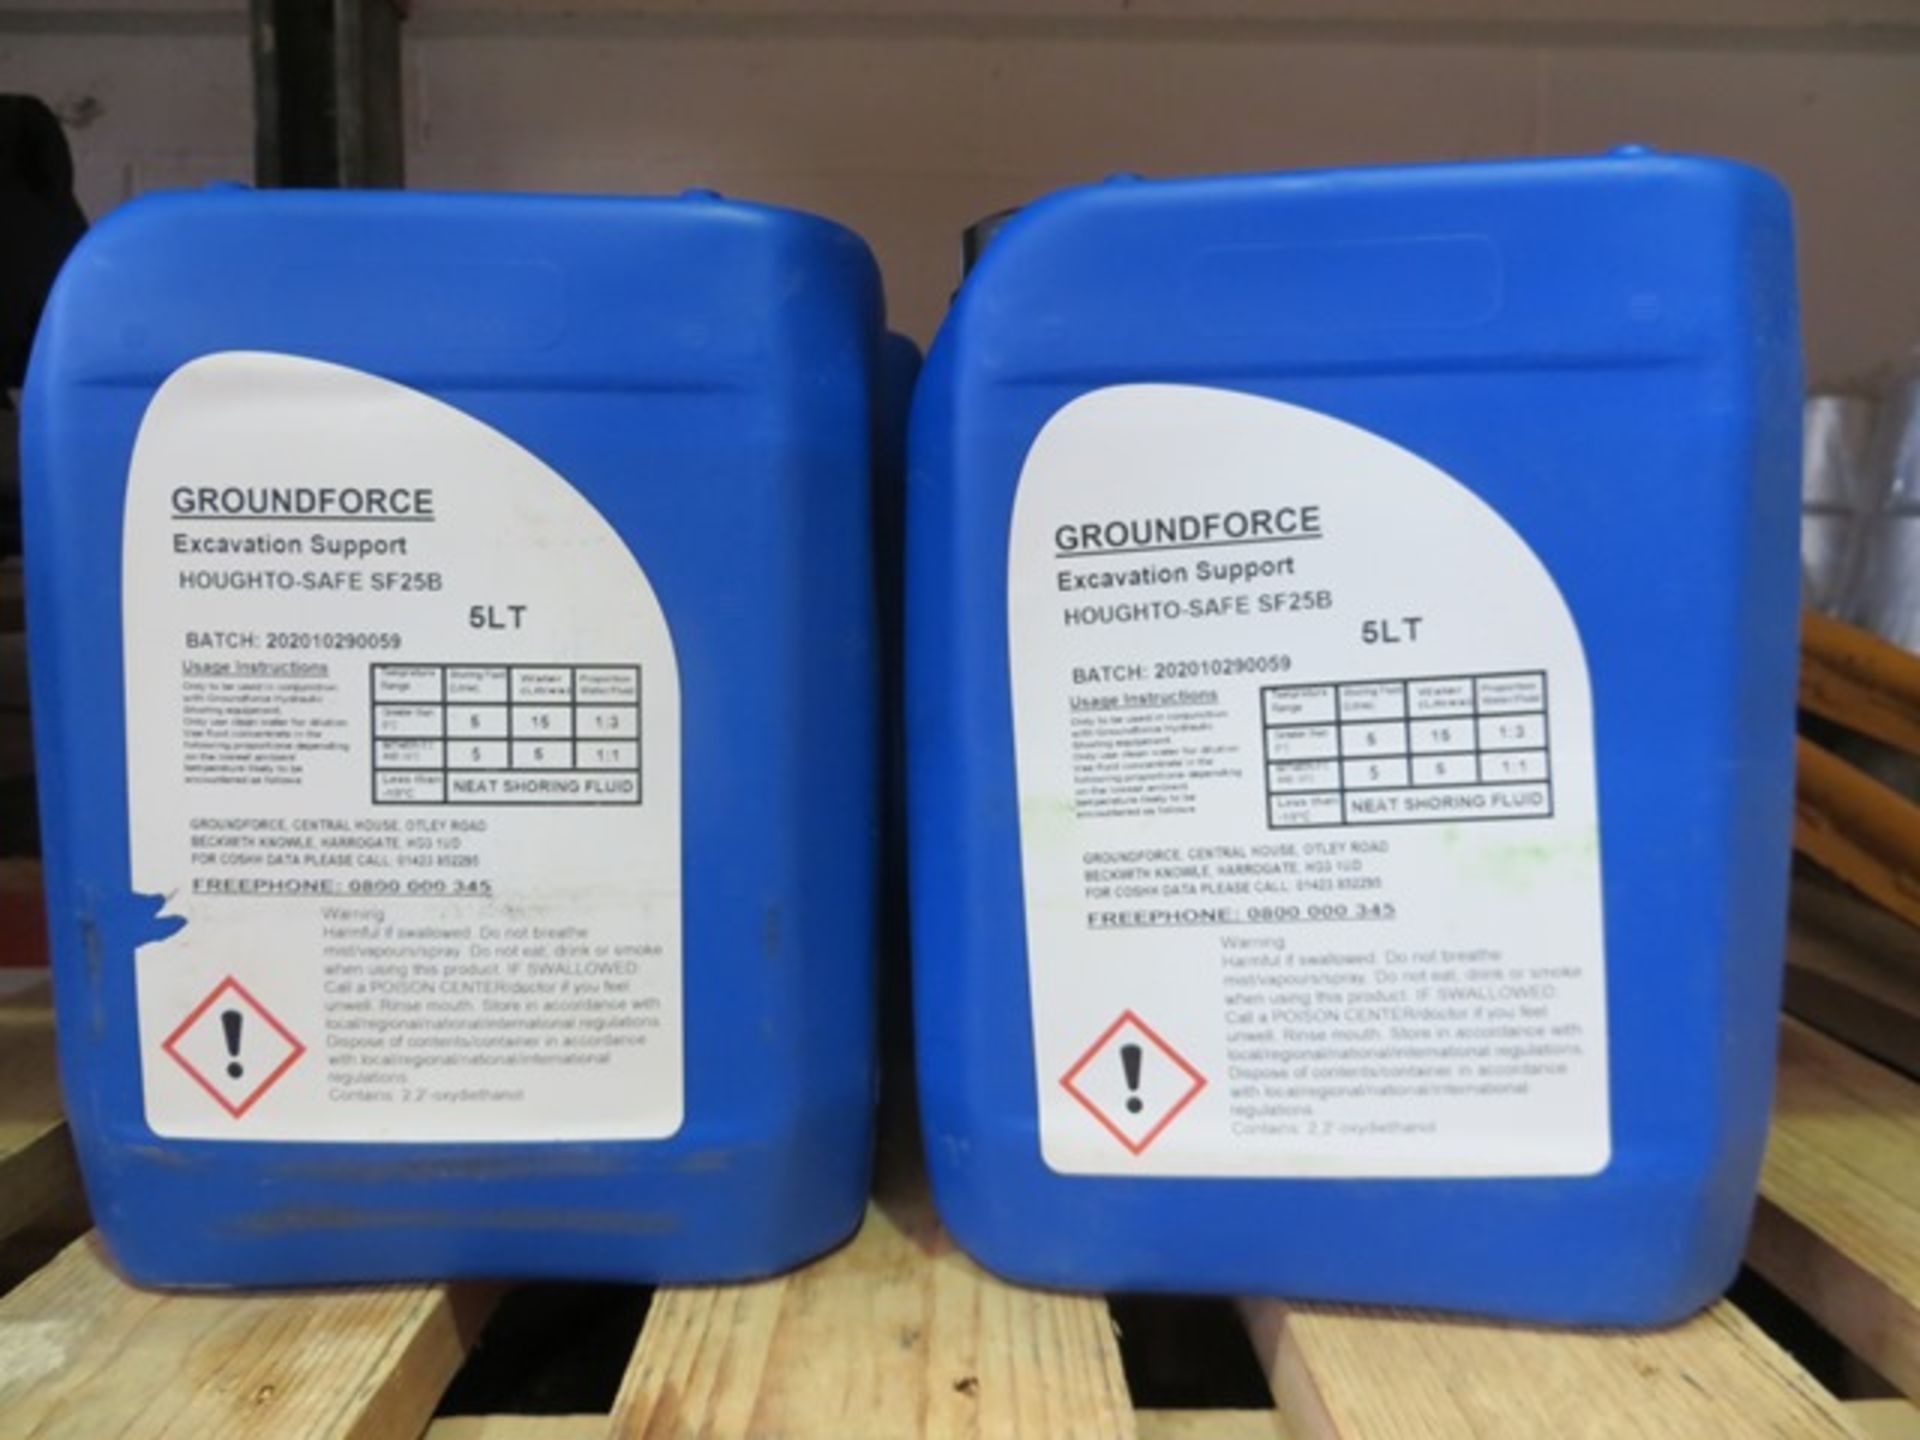 Four 5L containers of Groundforce excavation support Houghto-safe SF25B Hydraulic Fluid * This lot